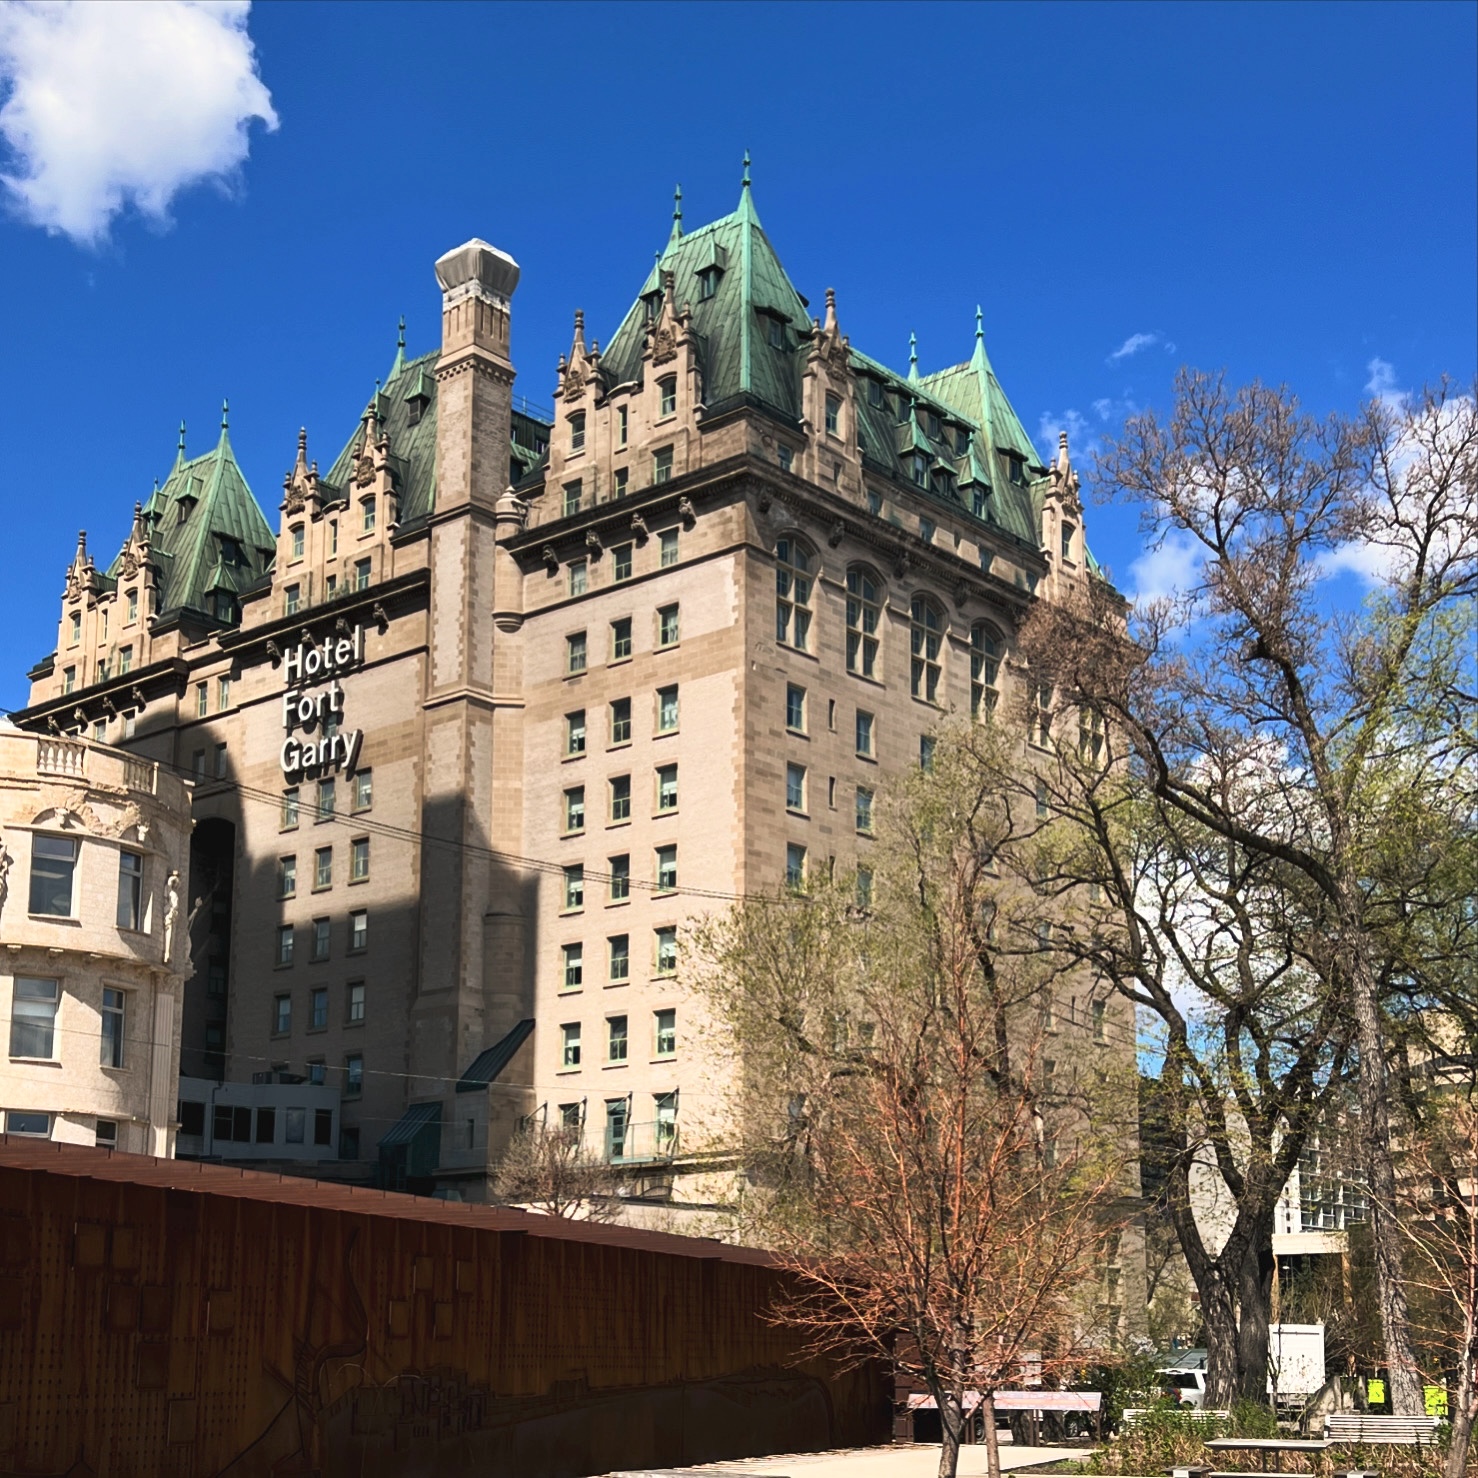 Hotel Fort Garry in Winnipeg, historic stone building with green-copper roofs under blue sky.